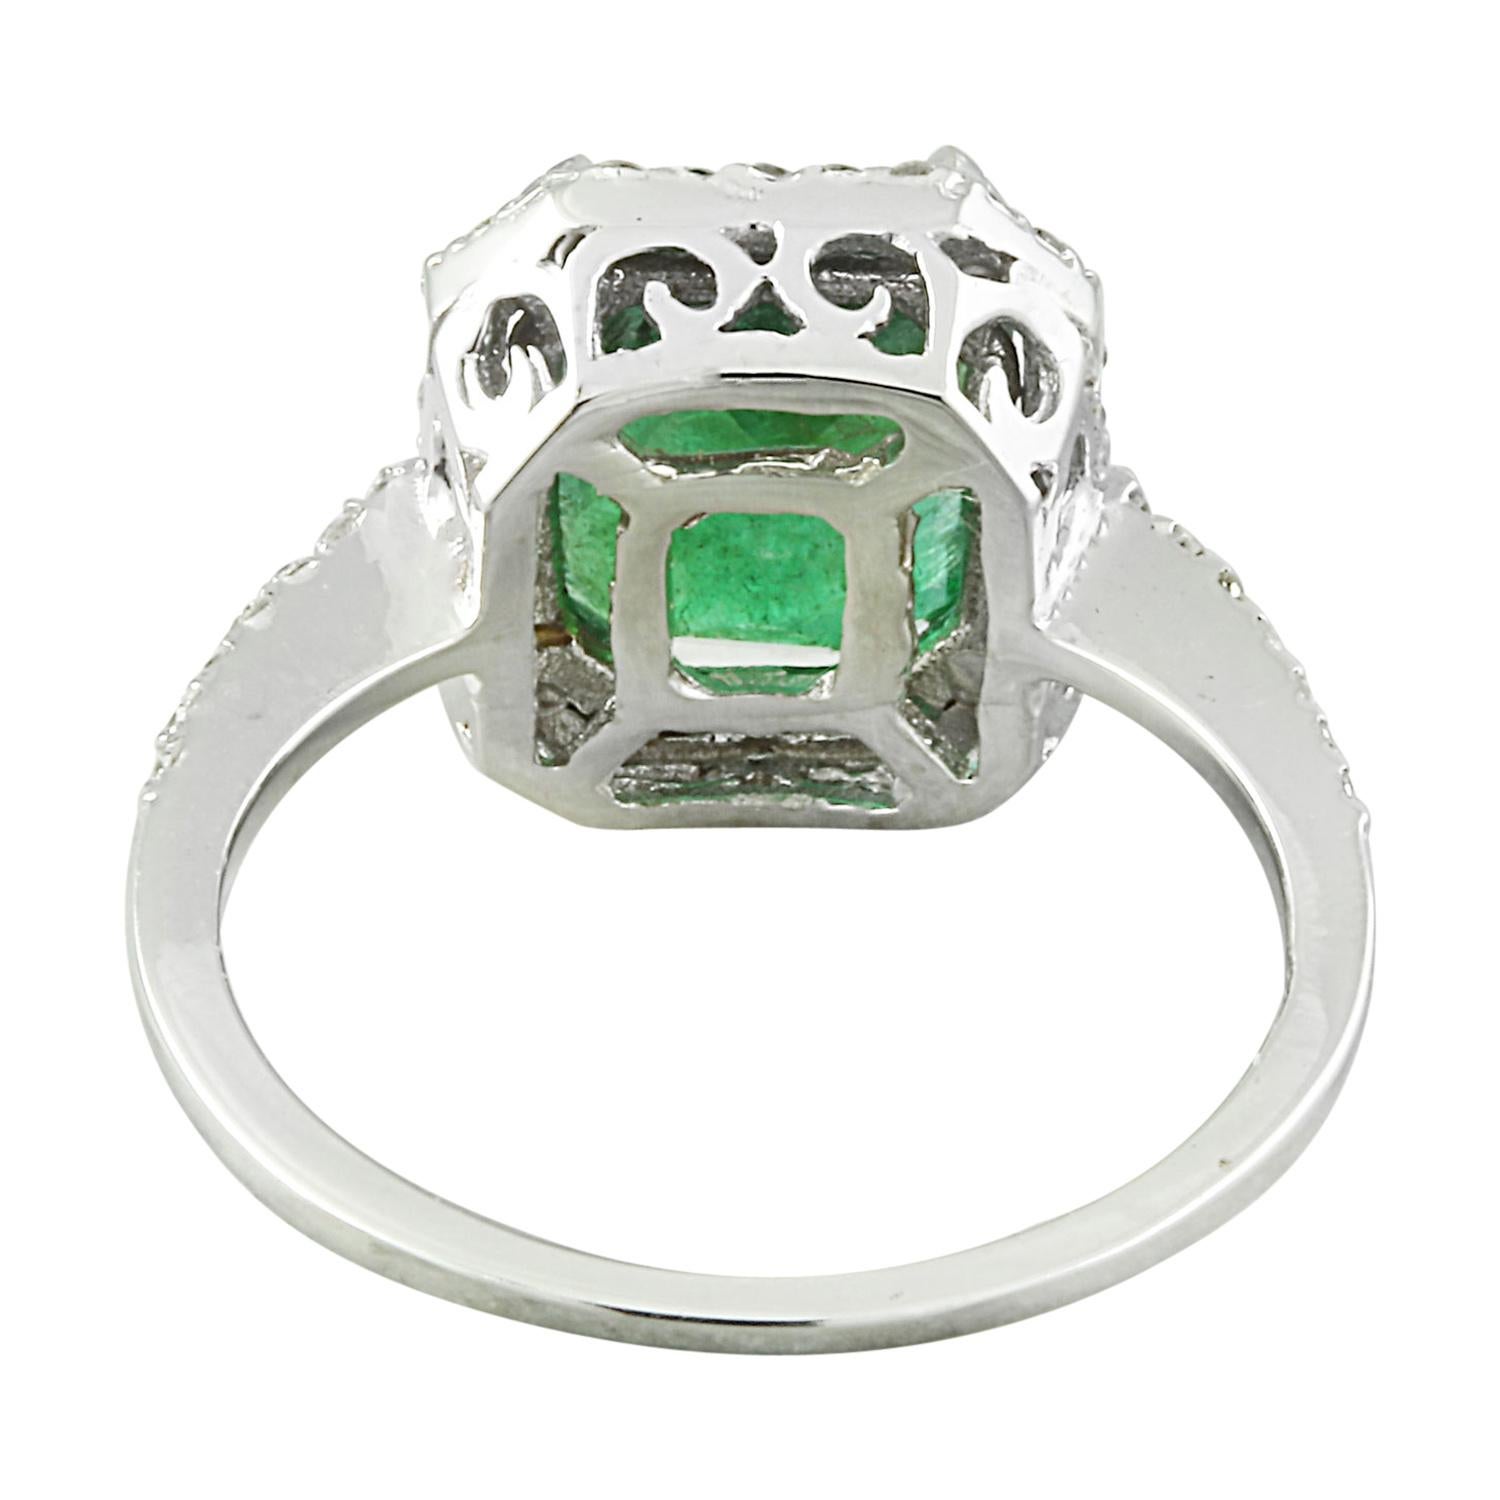 Emerald Cut Exquisite Natural Emerald Diamond Ring In 14 Karat Solid White Gold  For Sale